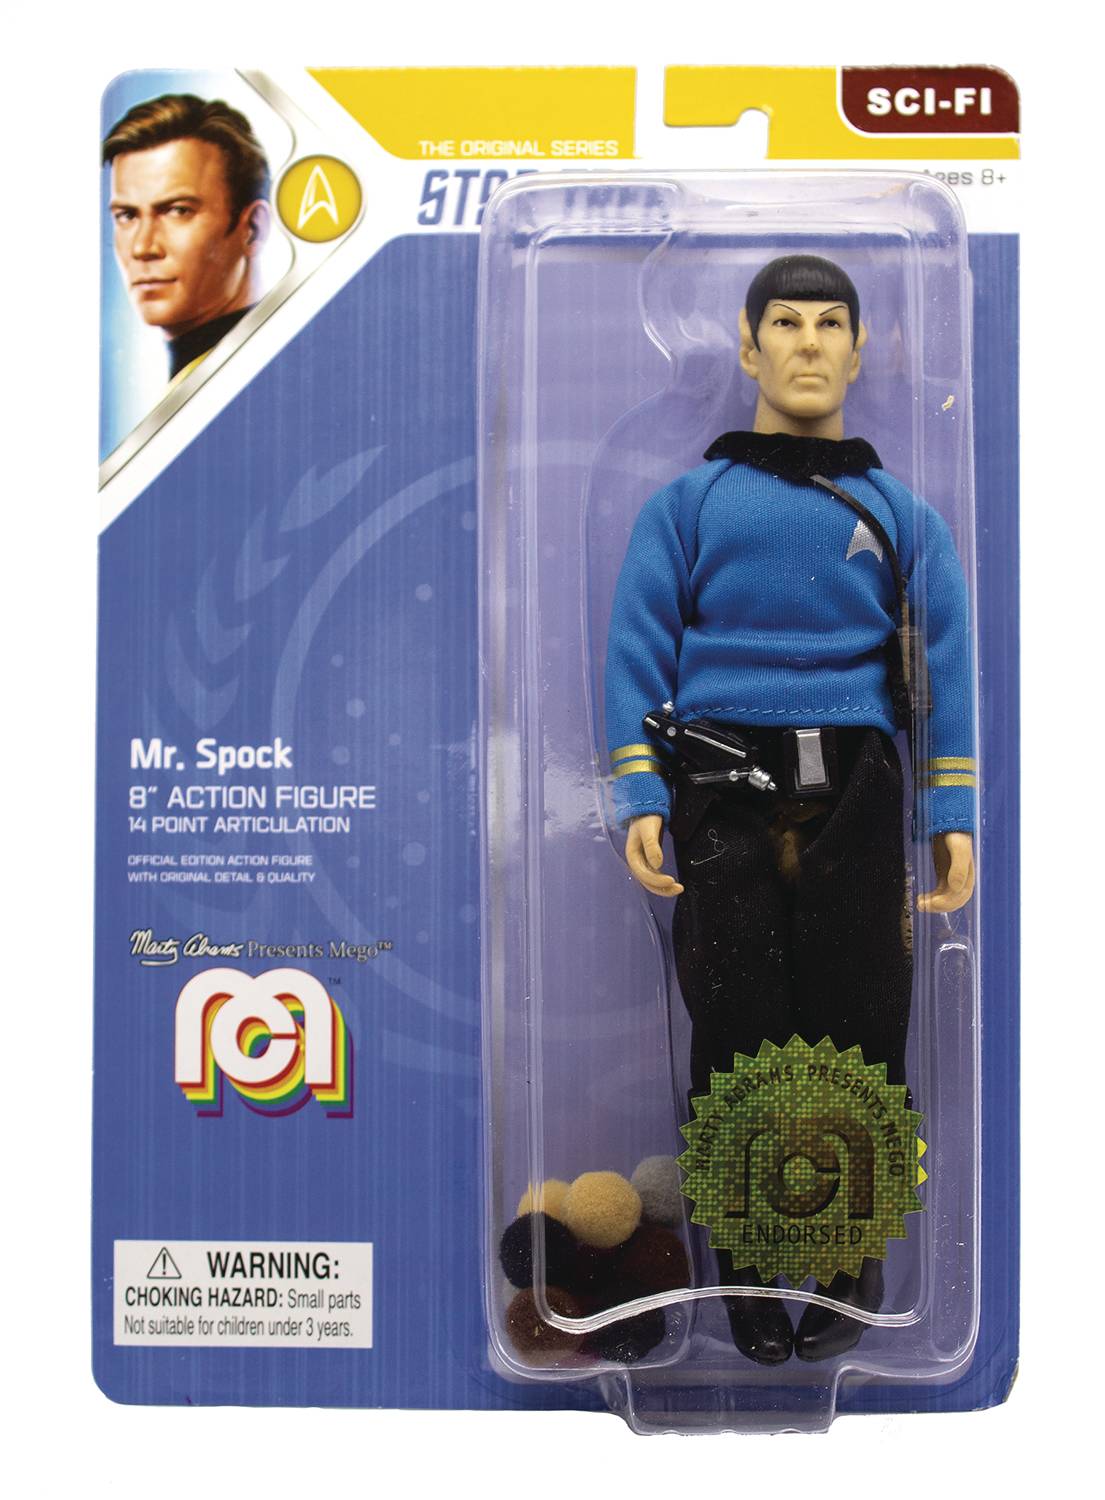 Mego Sci-Fi Wave 6 Star Trek Spock Trouble with Tribbles 8 inch Figure 